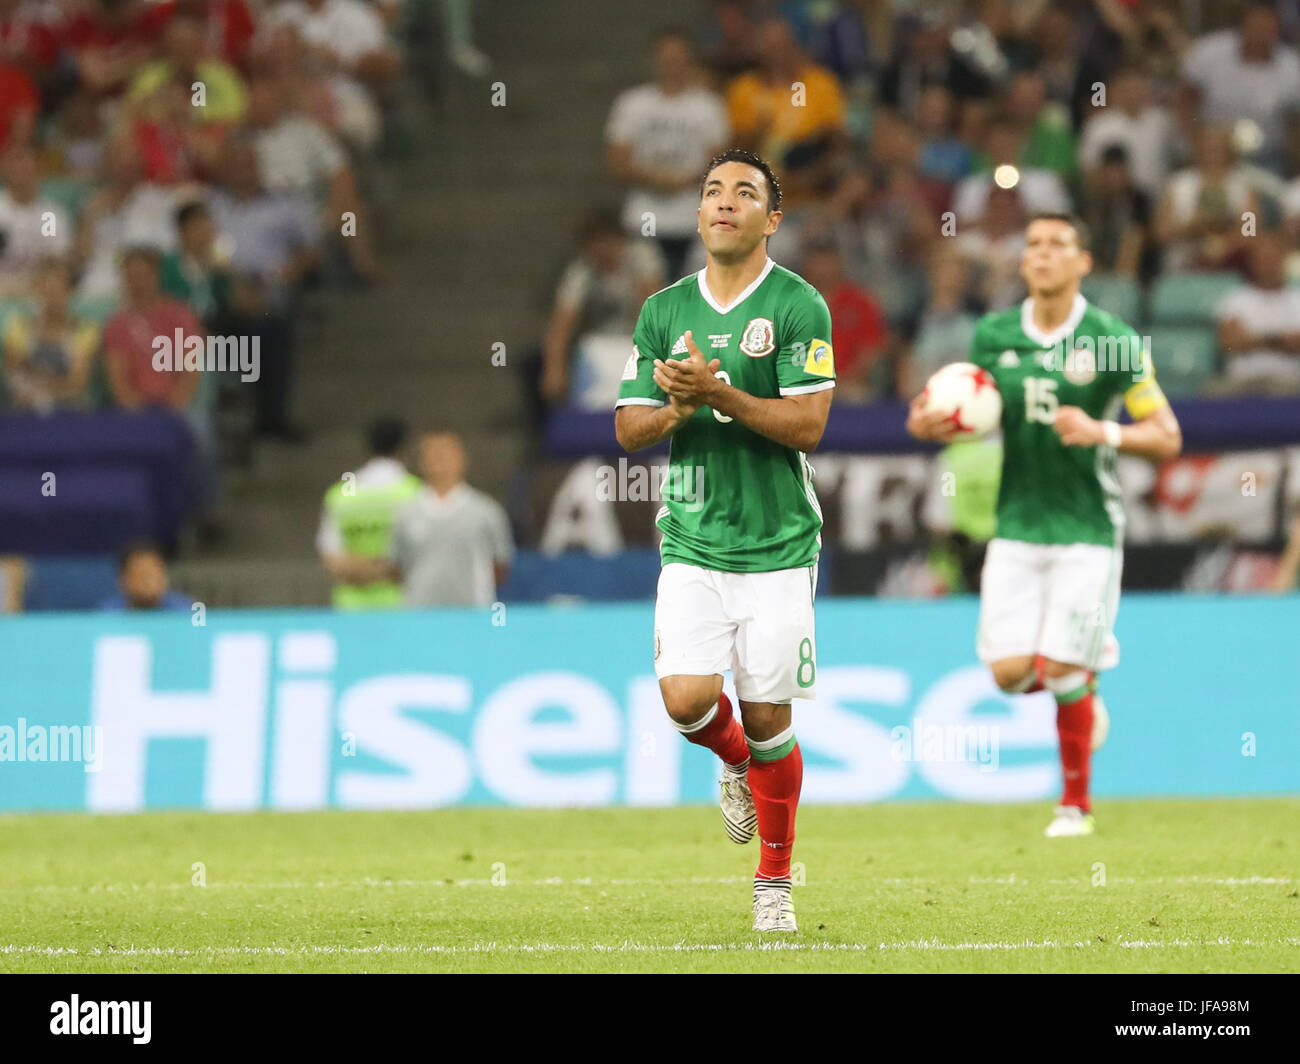 Sochi, Russia. 29th June, 2017. Marco Fabian (L) of Mexico celebrates after scoring during the semifinal match of the 2017 FIFA Confederations Cup against Germany in Sochi, Russia, June 29, 2017. Mexico lost 1-4. Credit: Xu Zijian/Xinhua/Alamy Live News Stock Photo